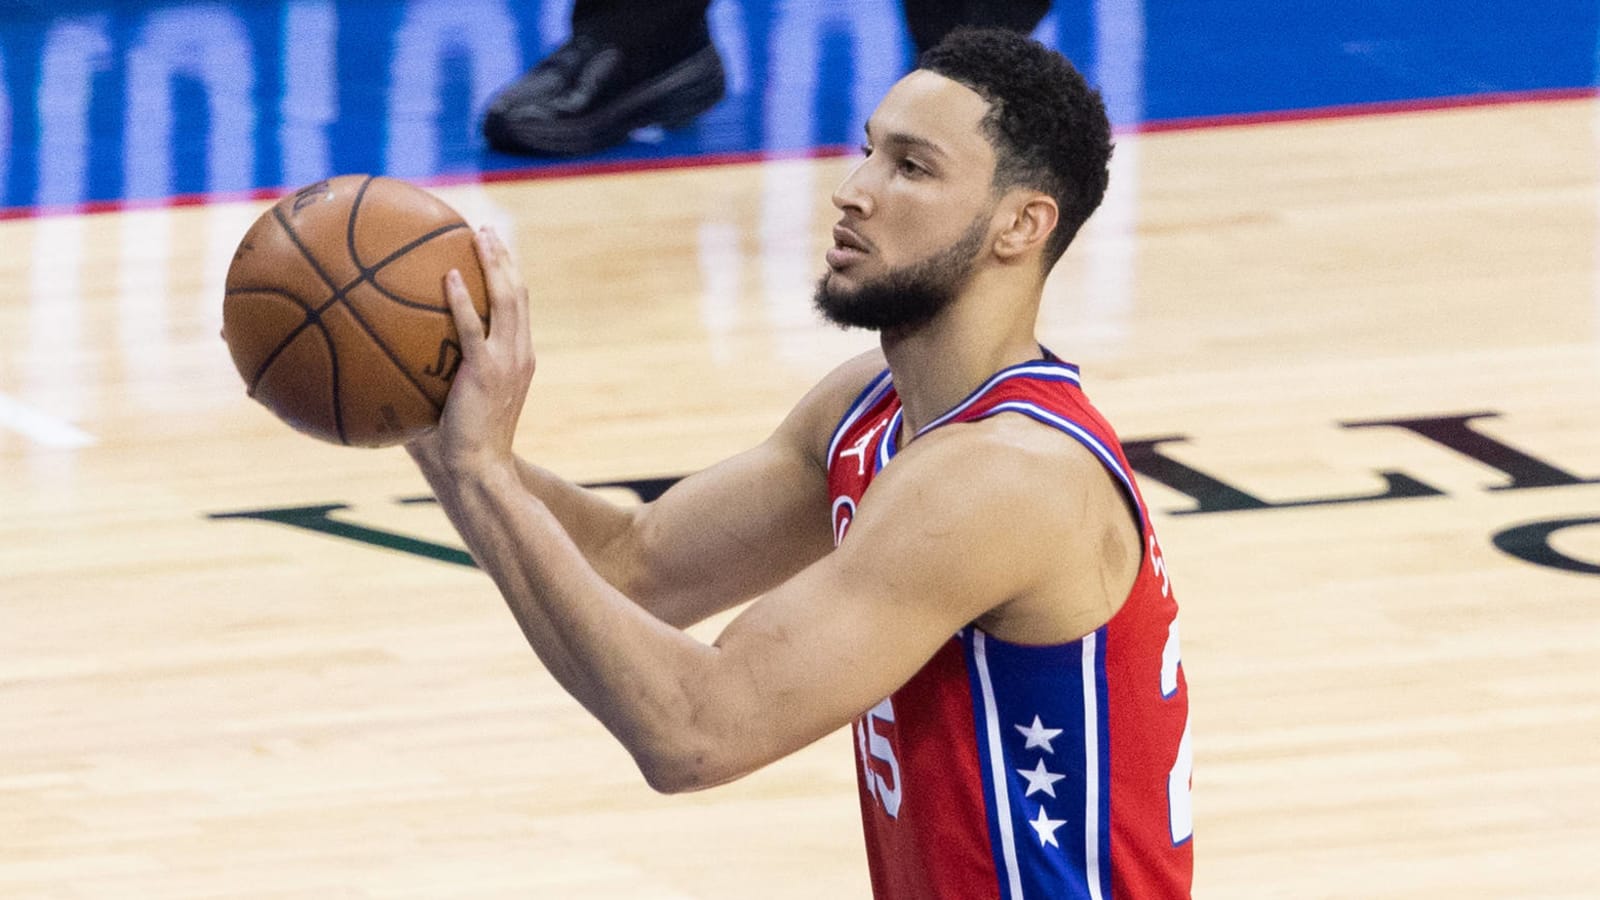 Ben Simmons in career-defining moment after poor Game 1